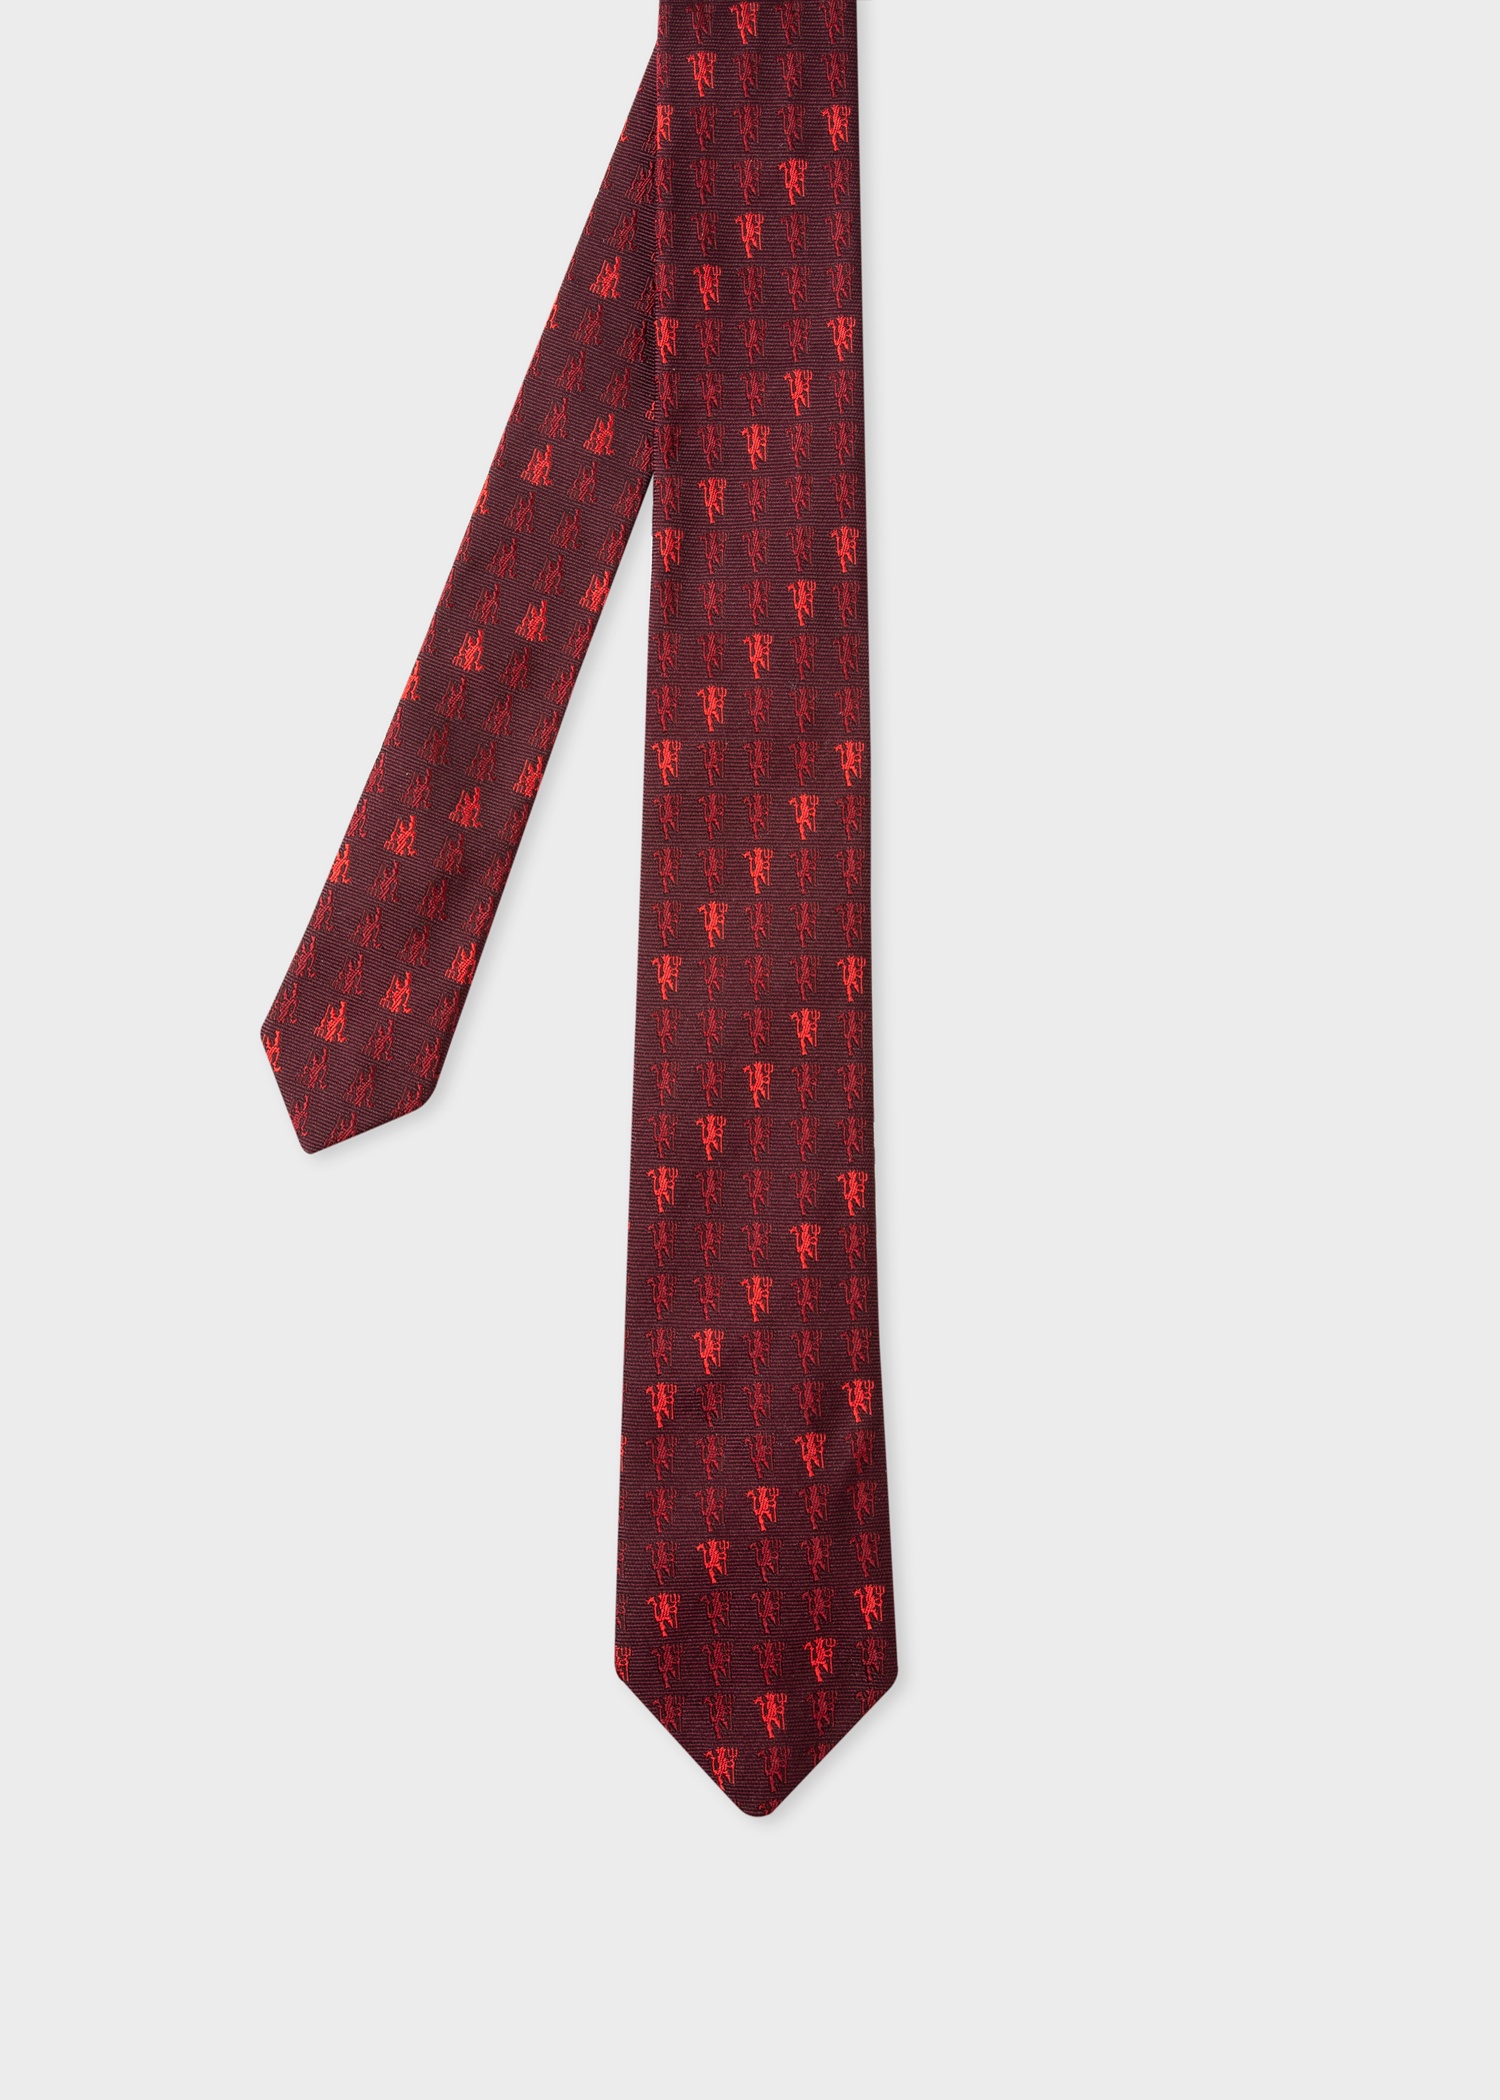 Paul Smith & Manchester United - 'Red Devil' Narrow Silk Tie - 1